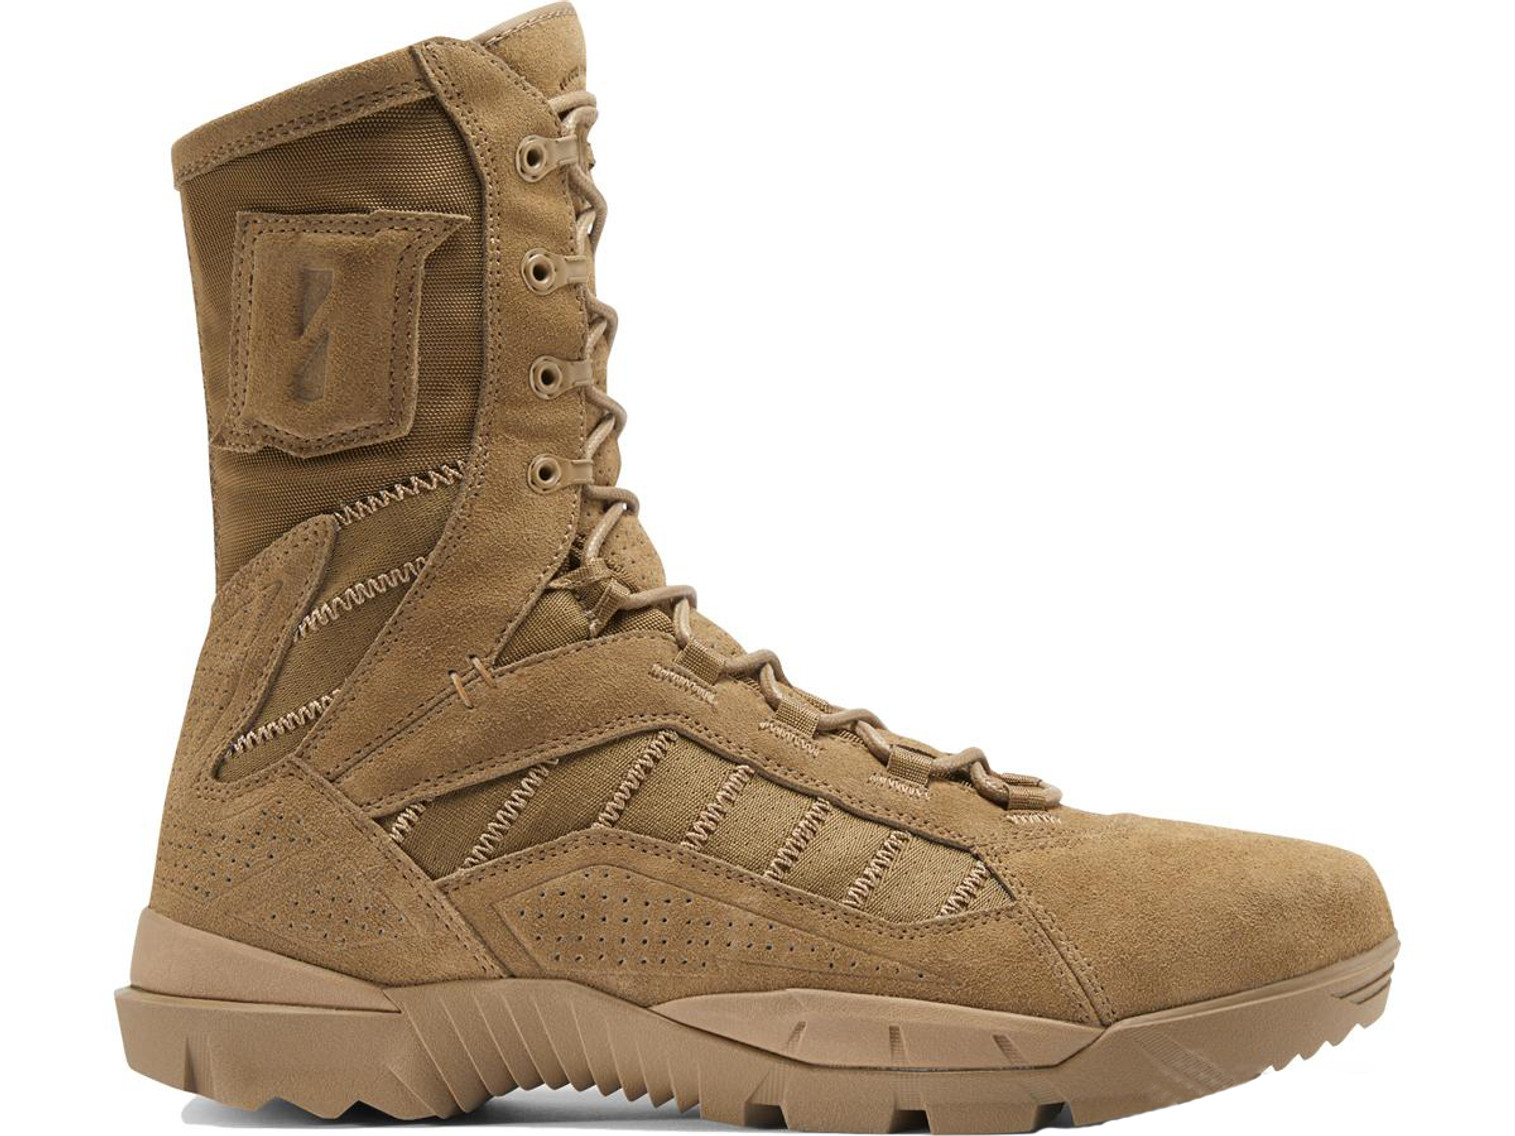 Viktos "STRIFE" 8" Tactical Boots (Color: Coyote / 10.5)